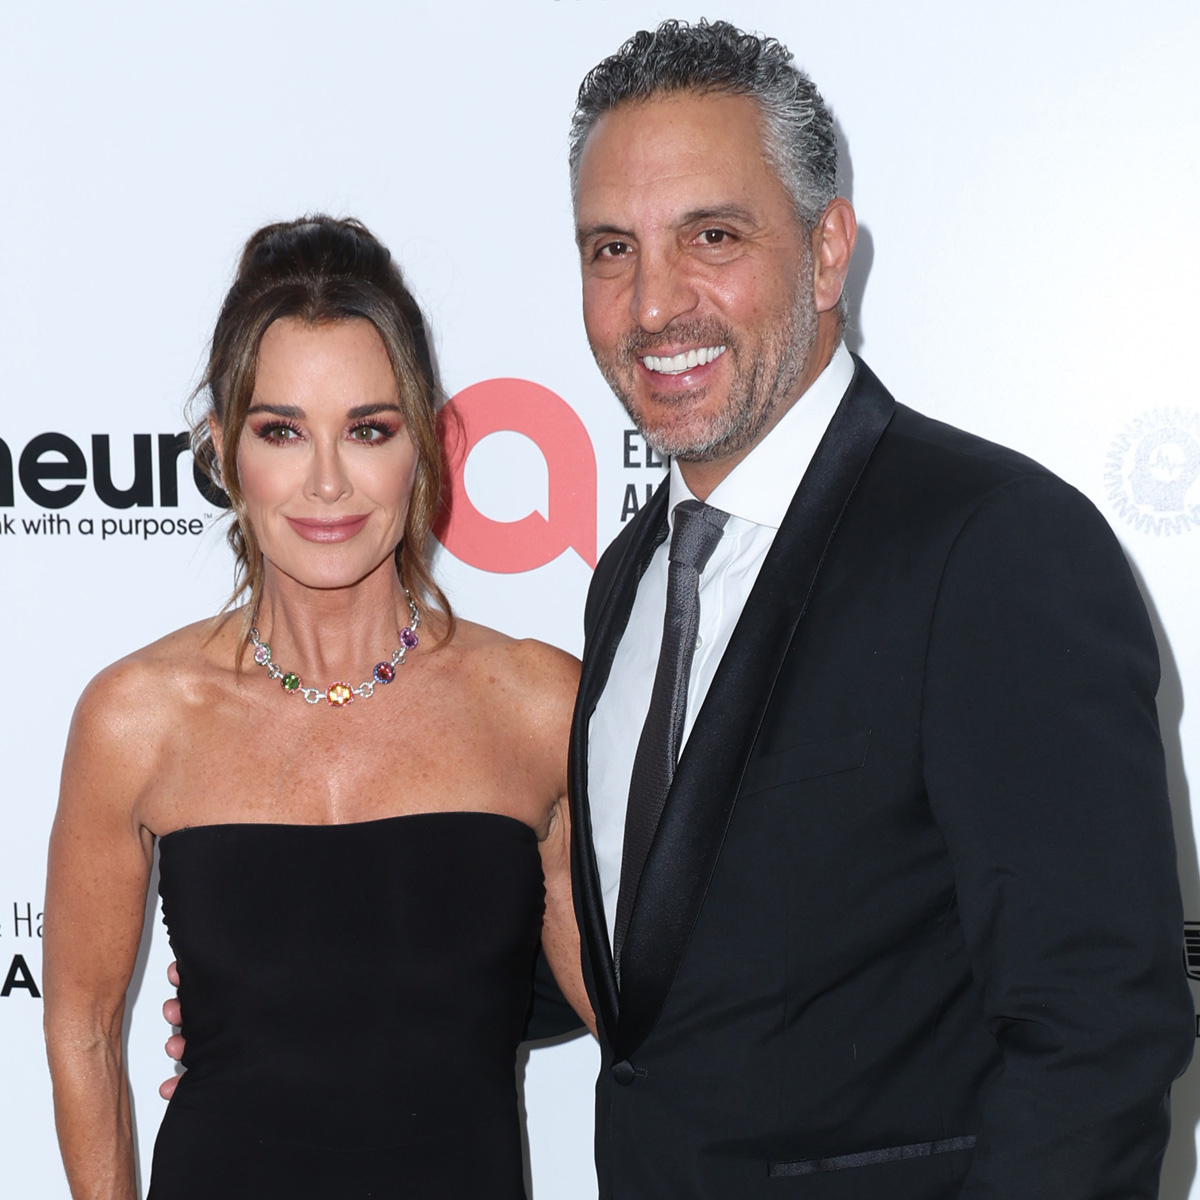 Kyle Richards and Mauricio Umansky Have 'Separated' After 27 Years